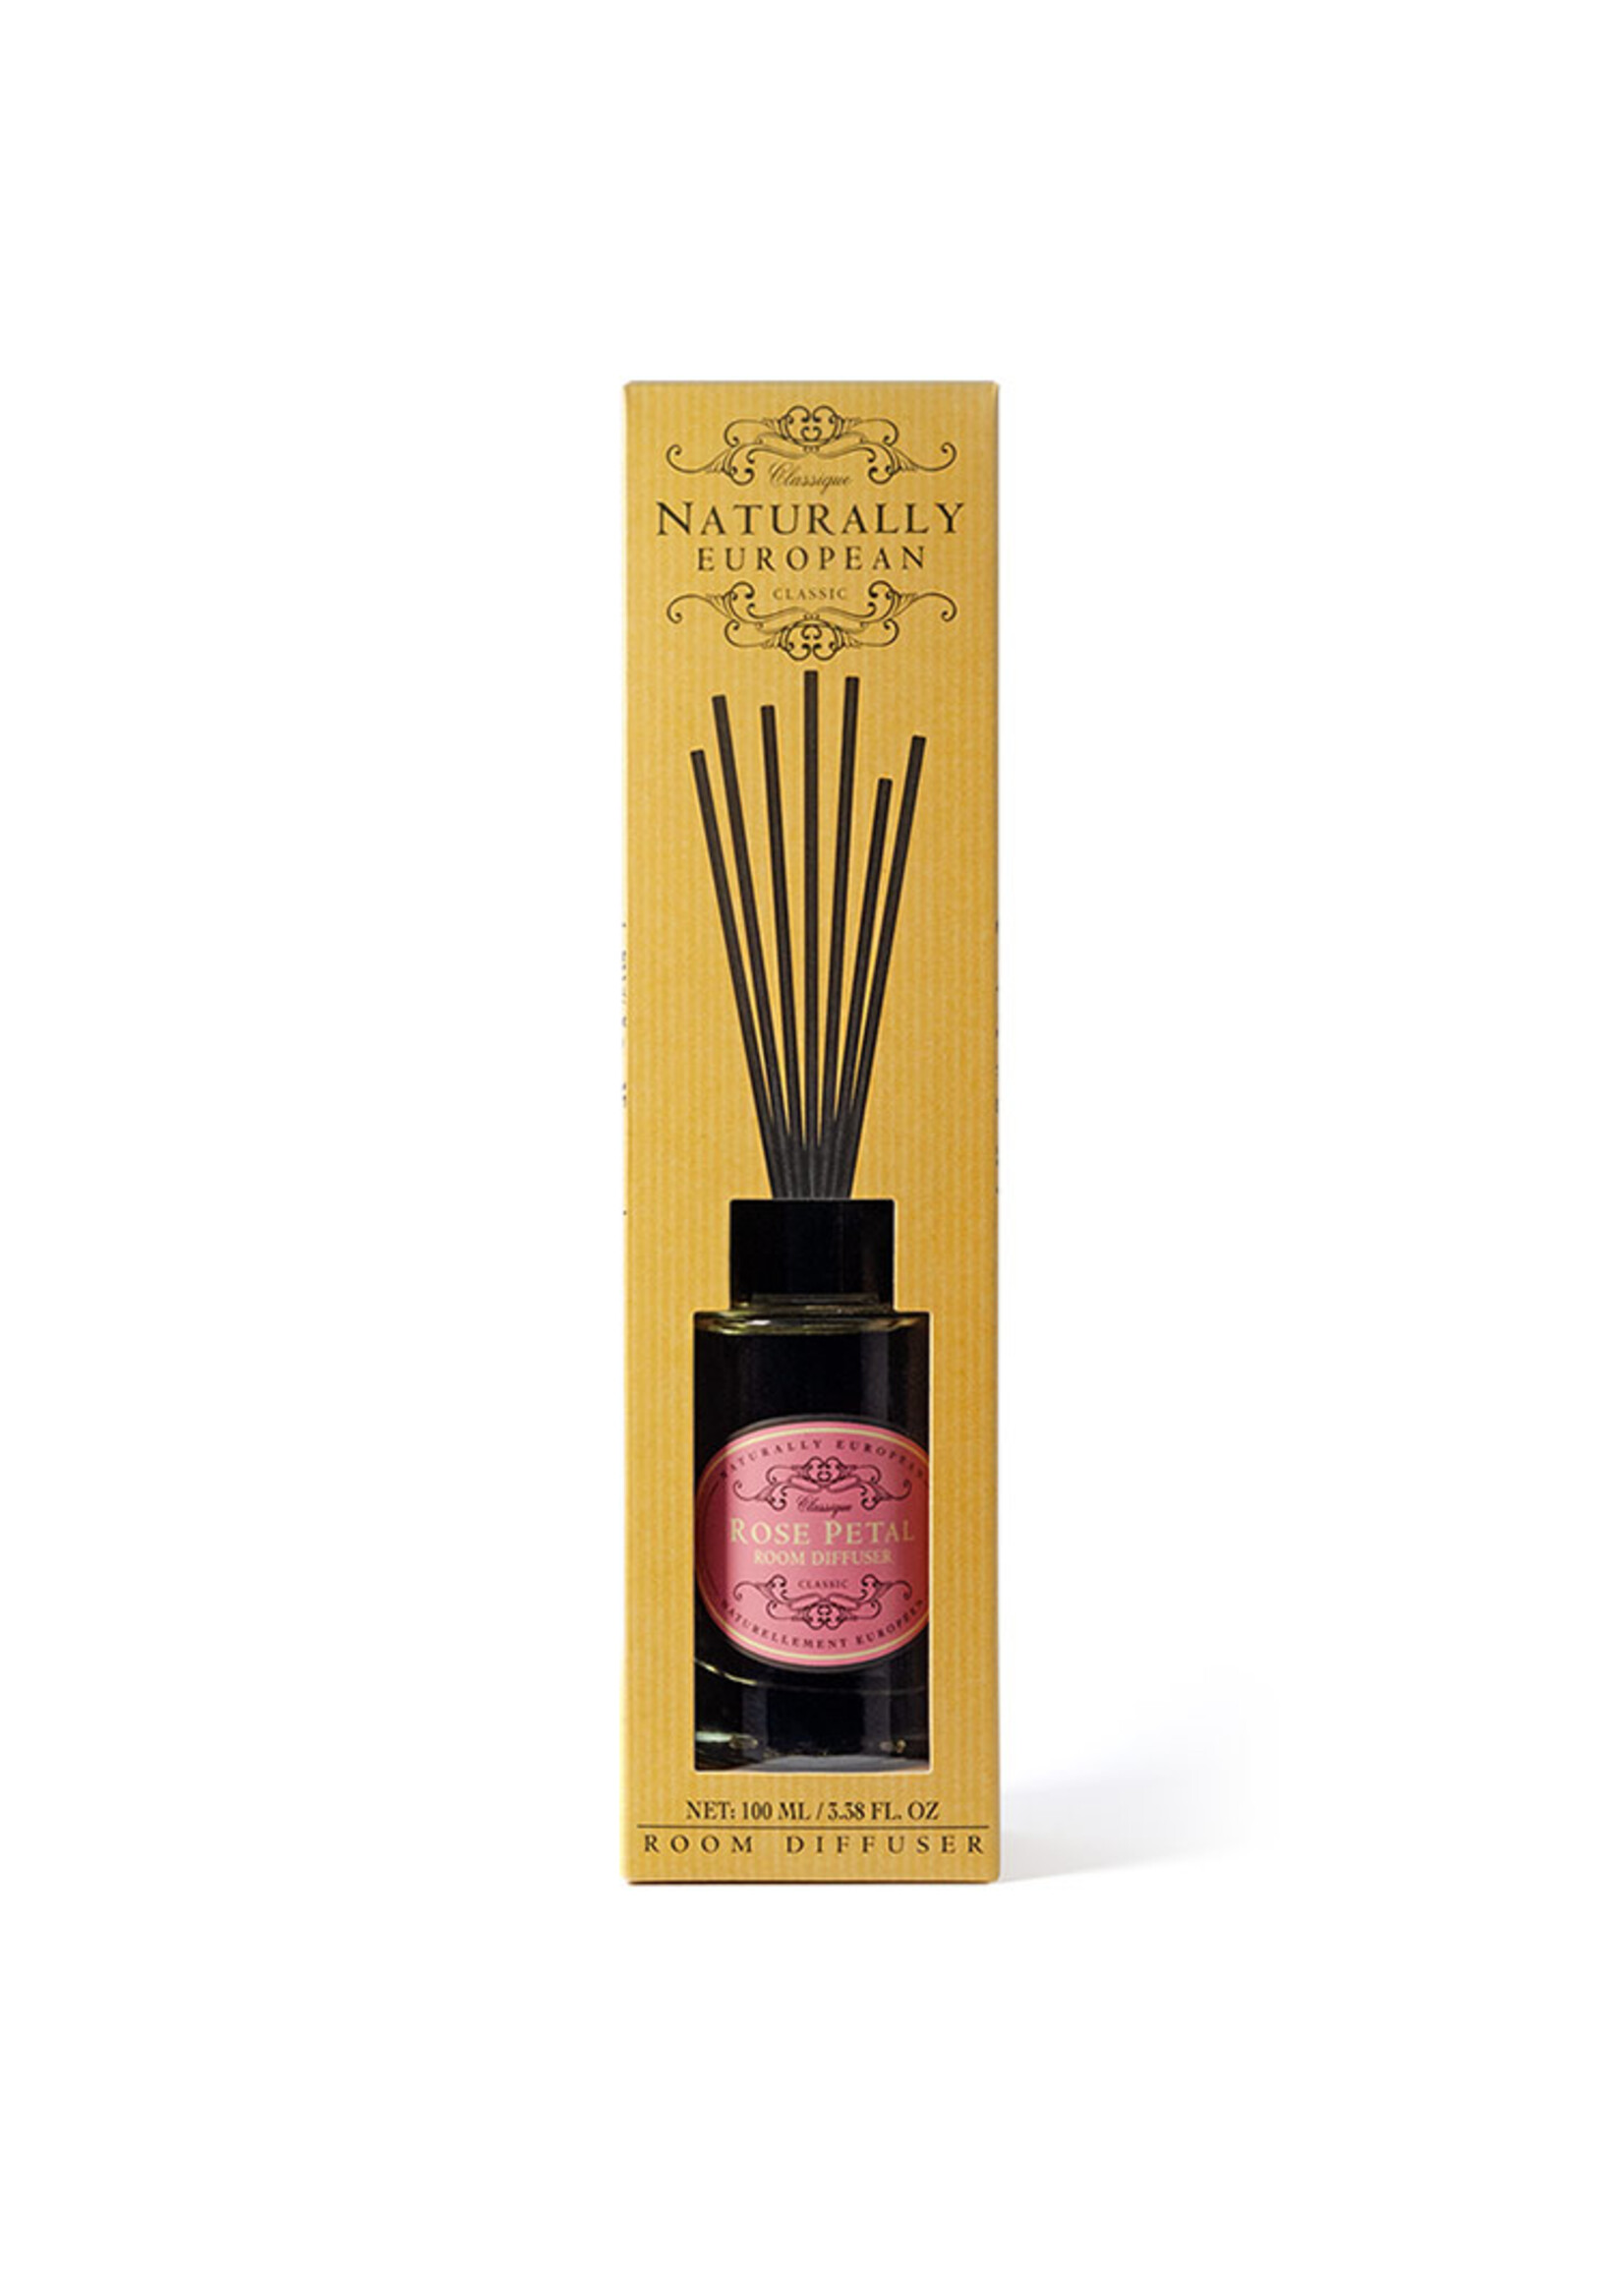 The Somerset Toiletry Co Diffuser 100ML Rose Petal